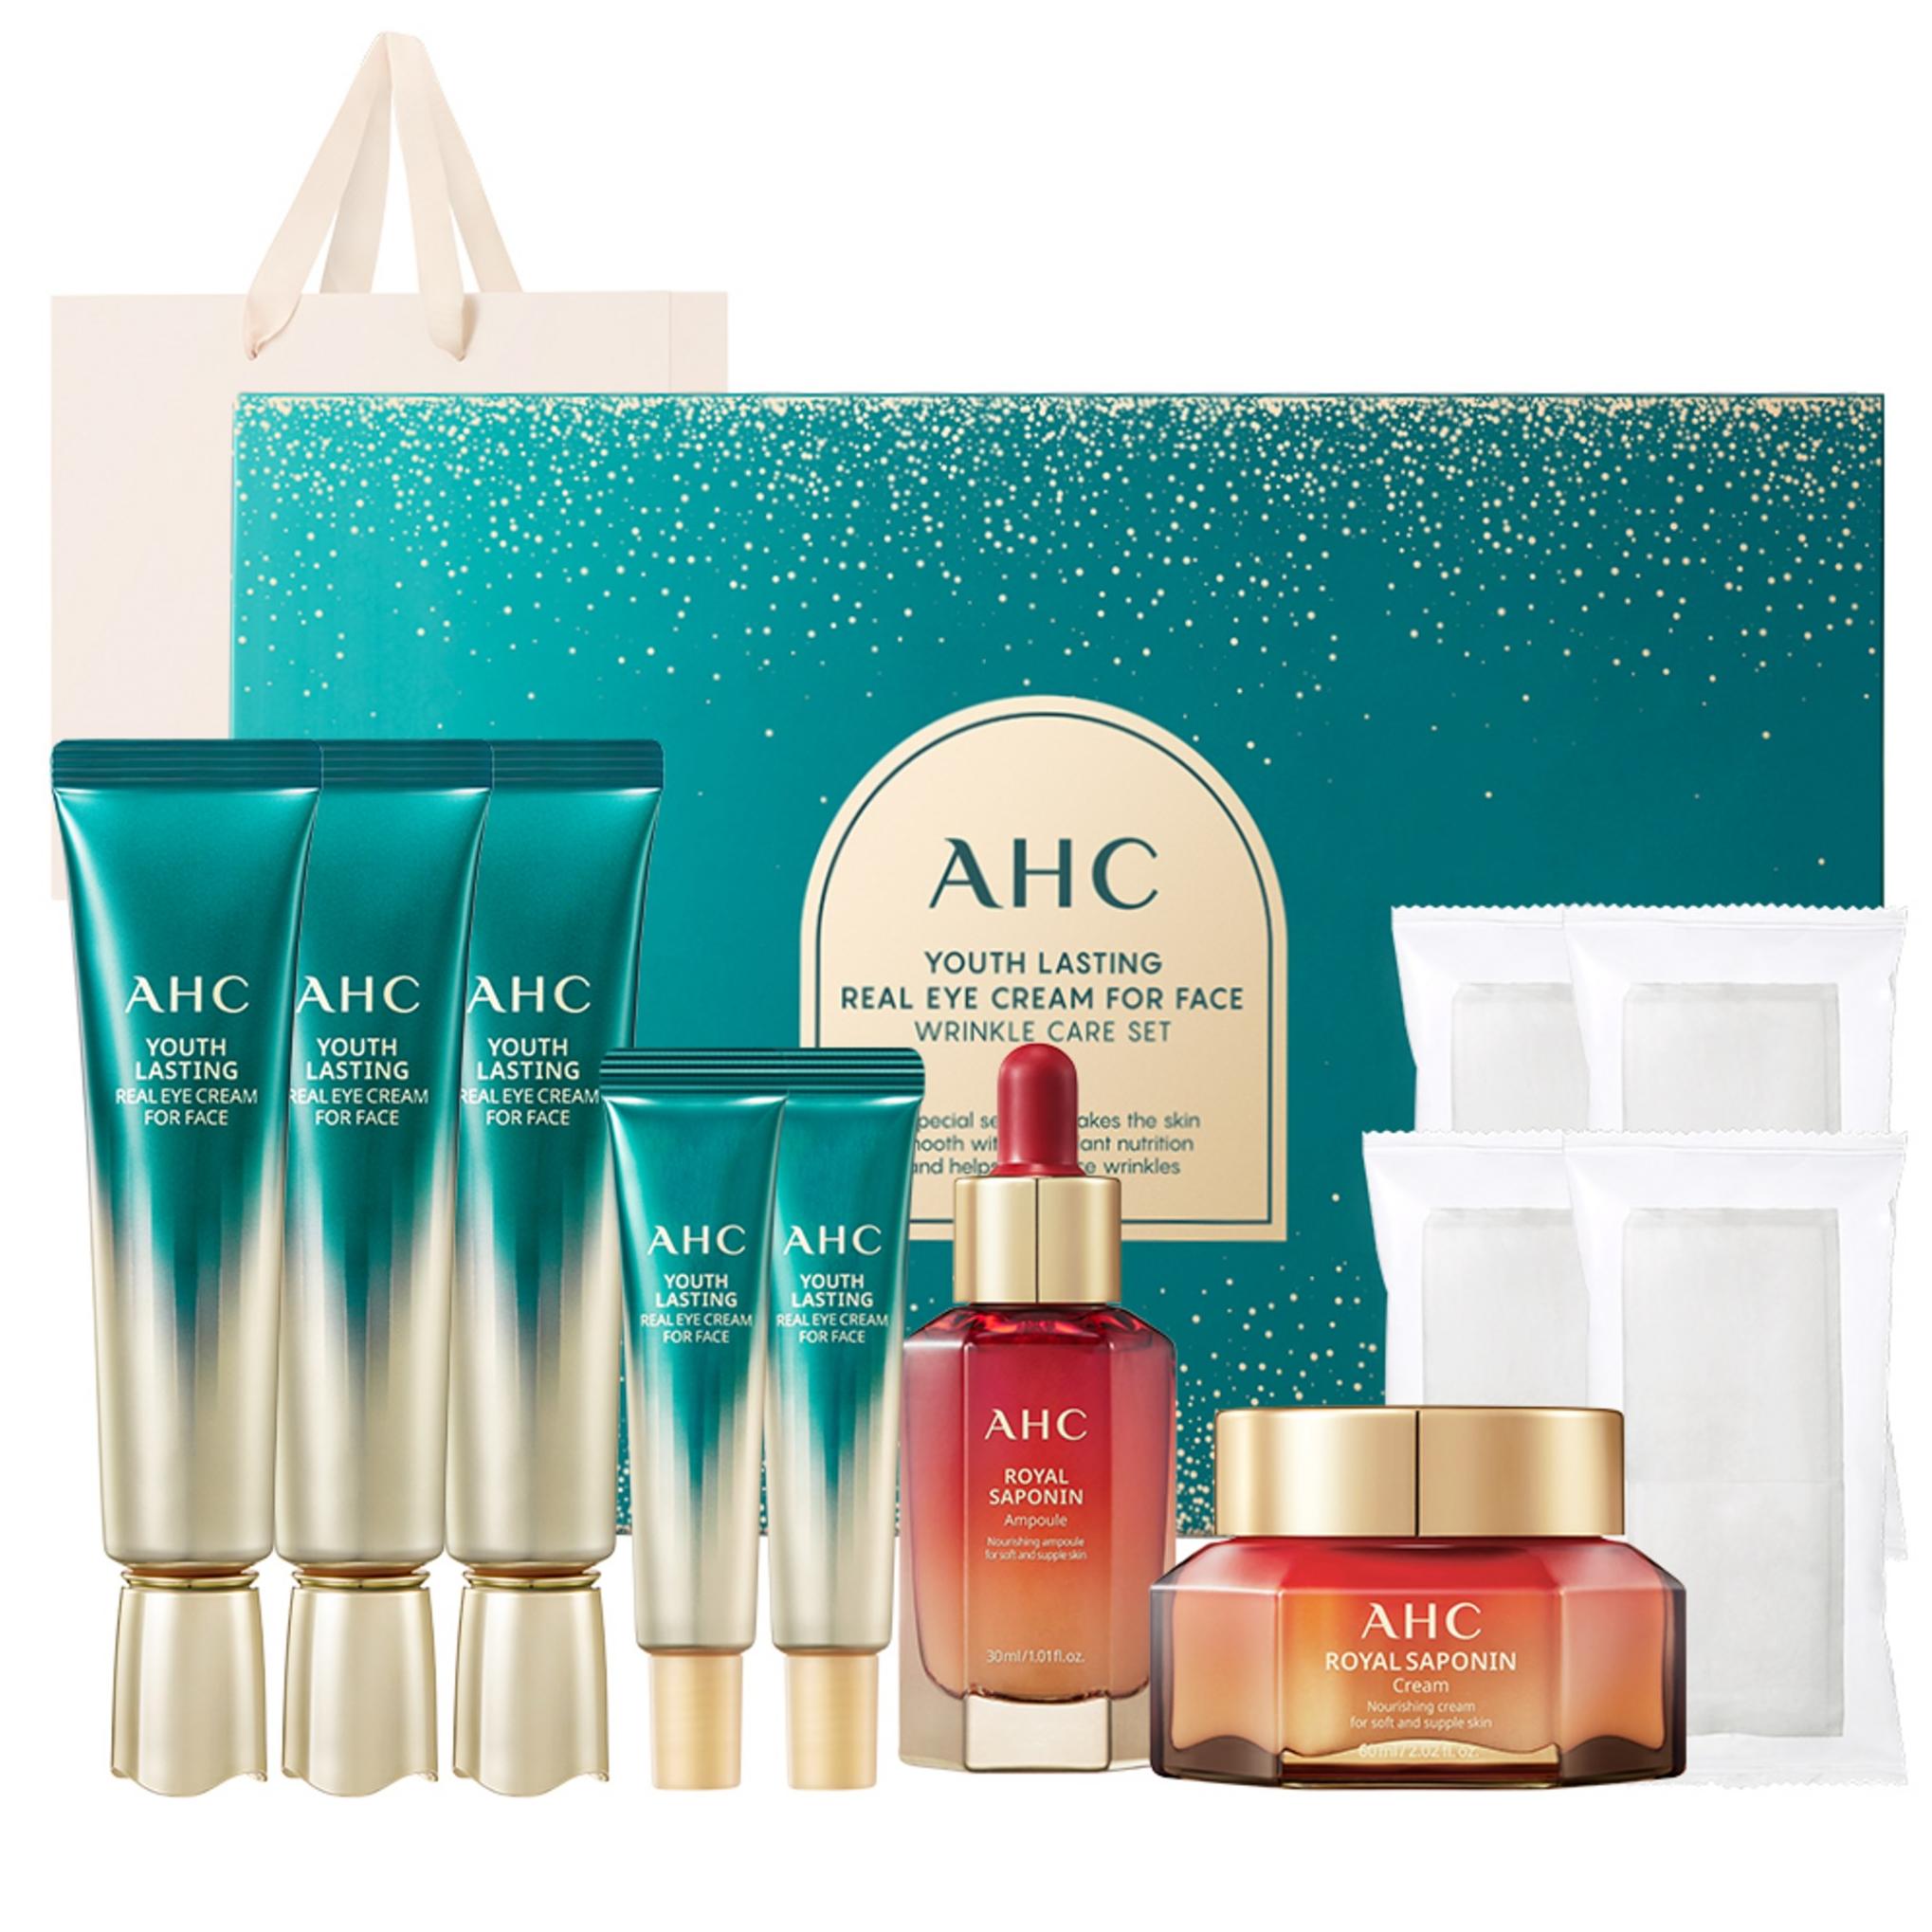 AHC Youth Lasting Real Eye Cream for Face Wrinkle Care Set + Shopping Bag